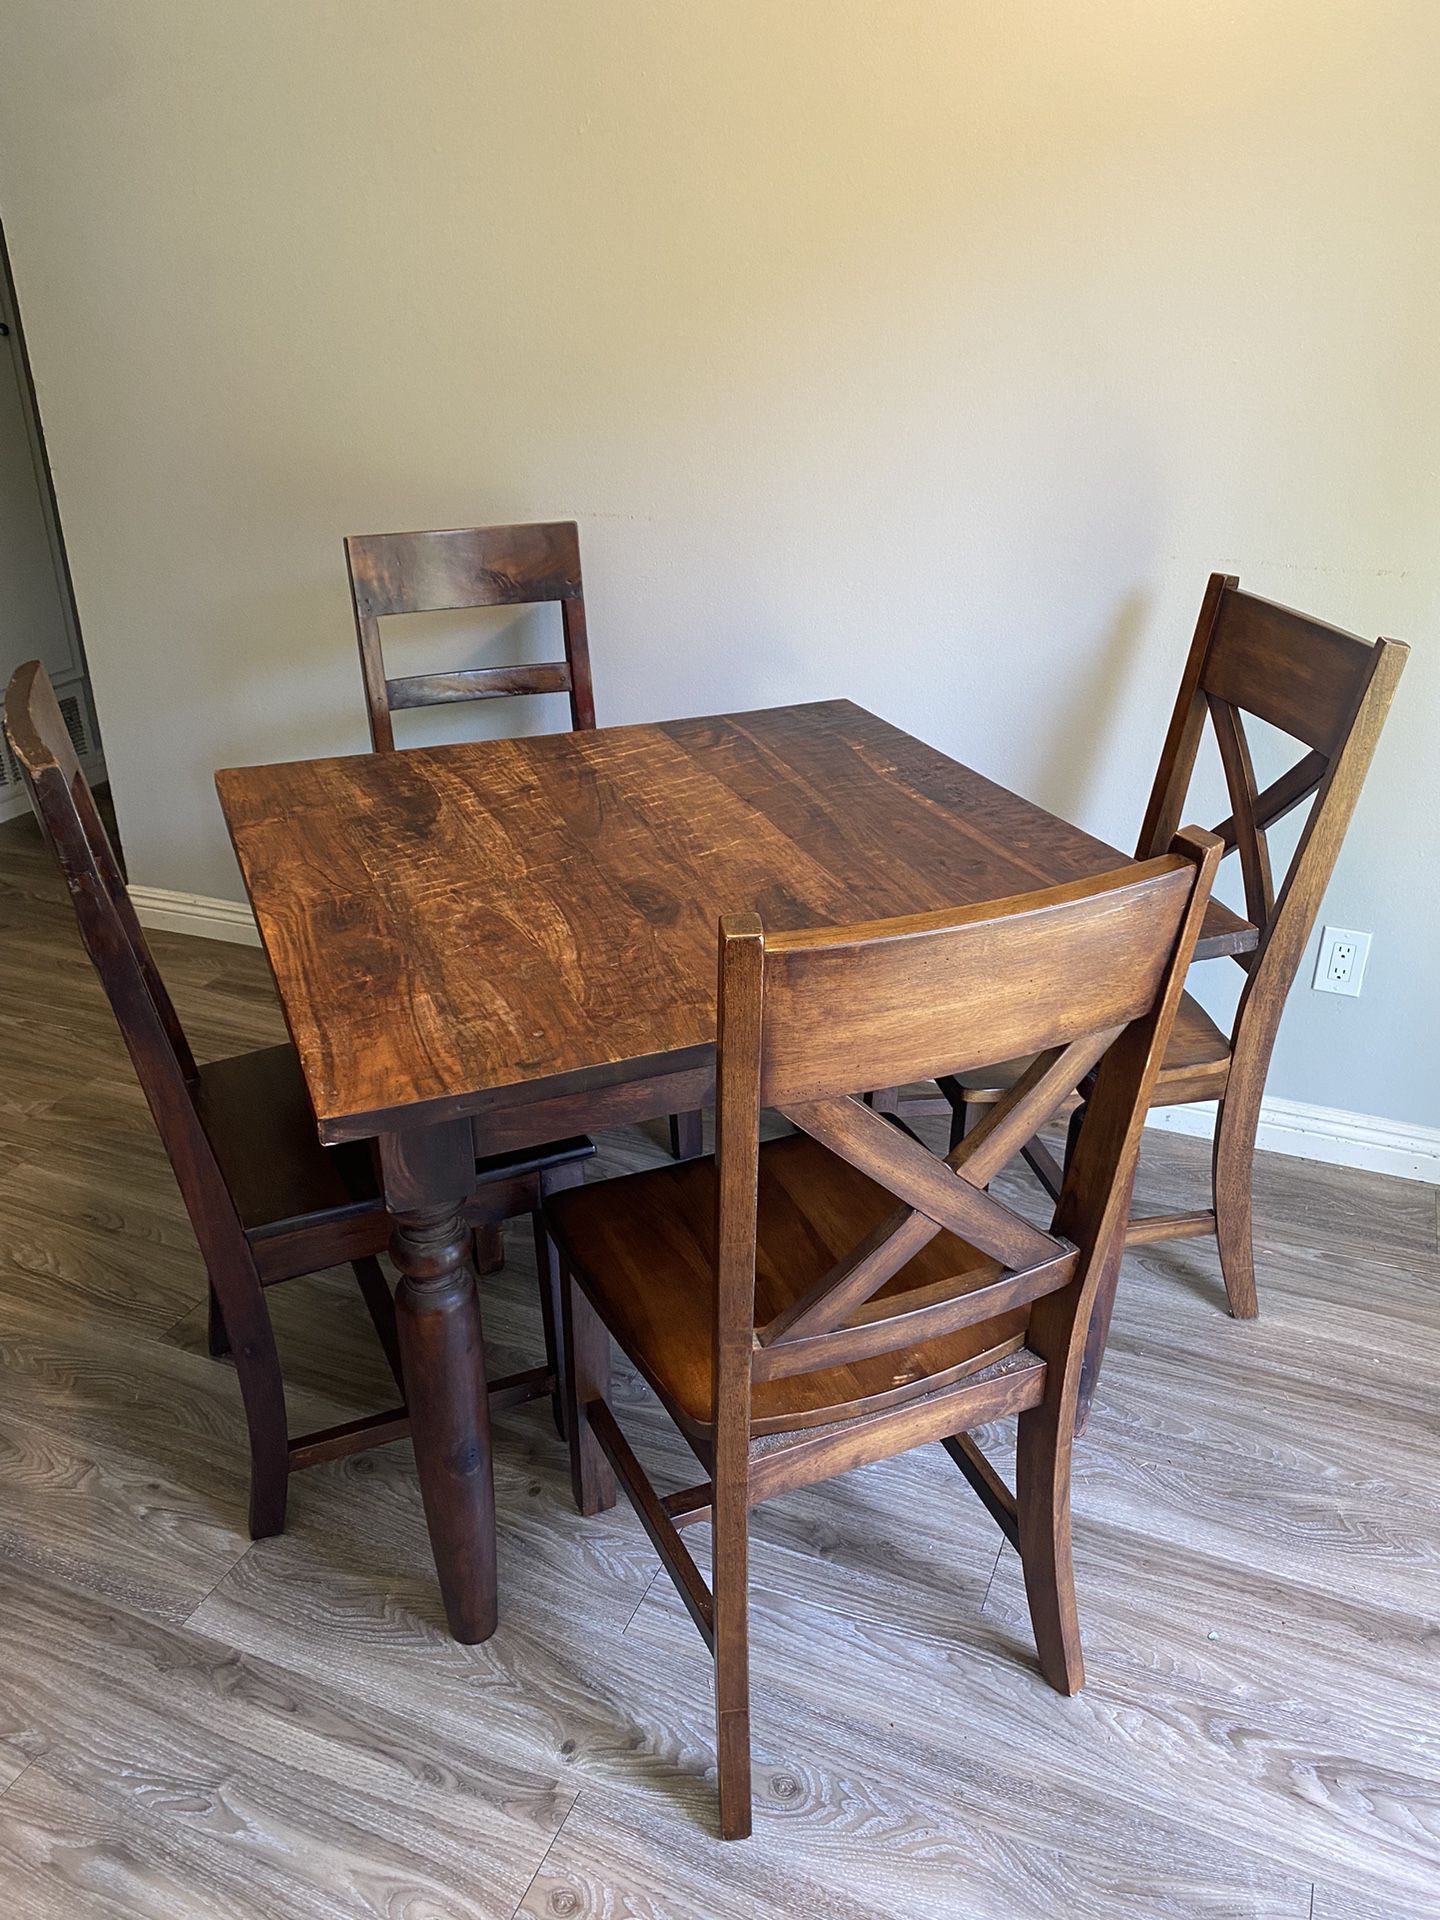 Wooden Dining Tables and Chairs